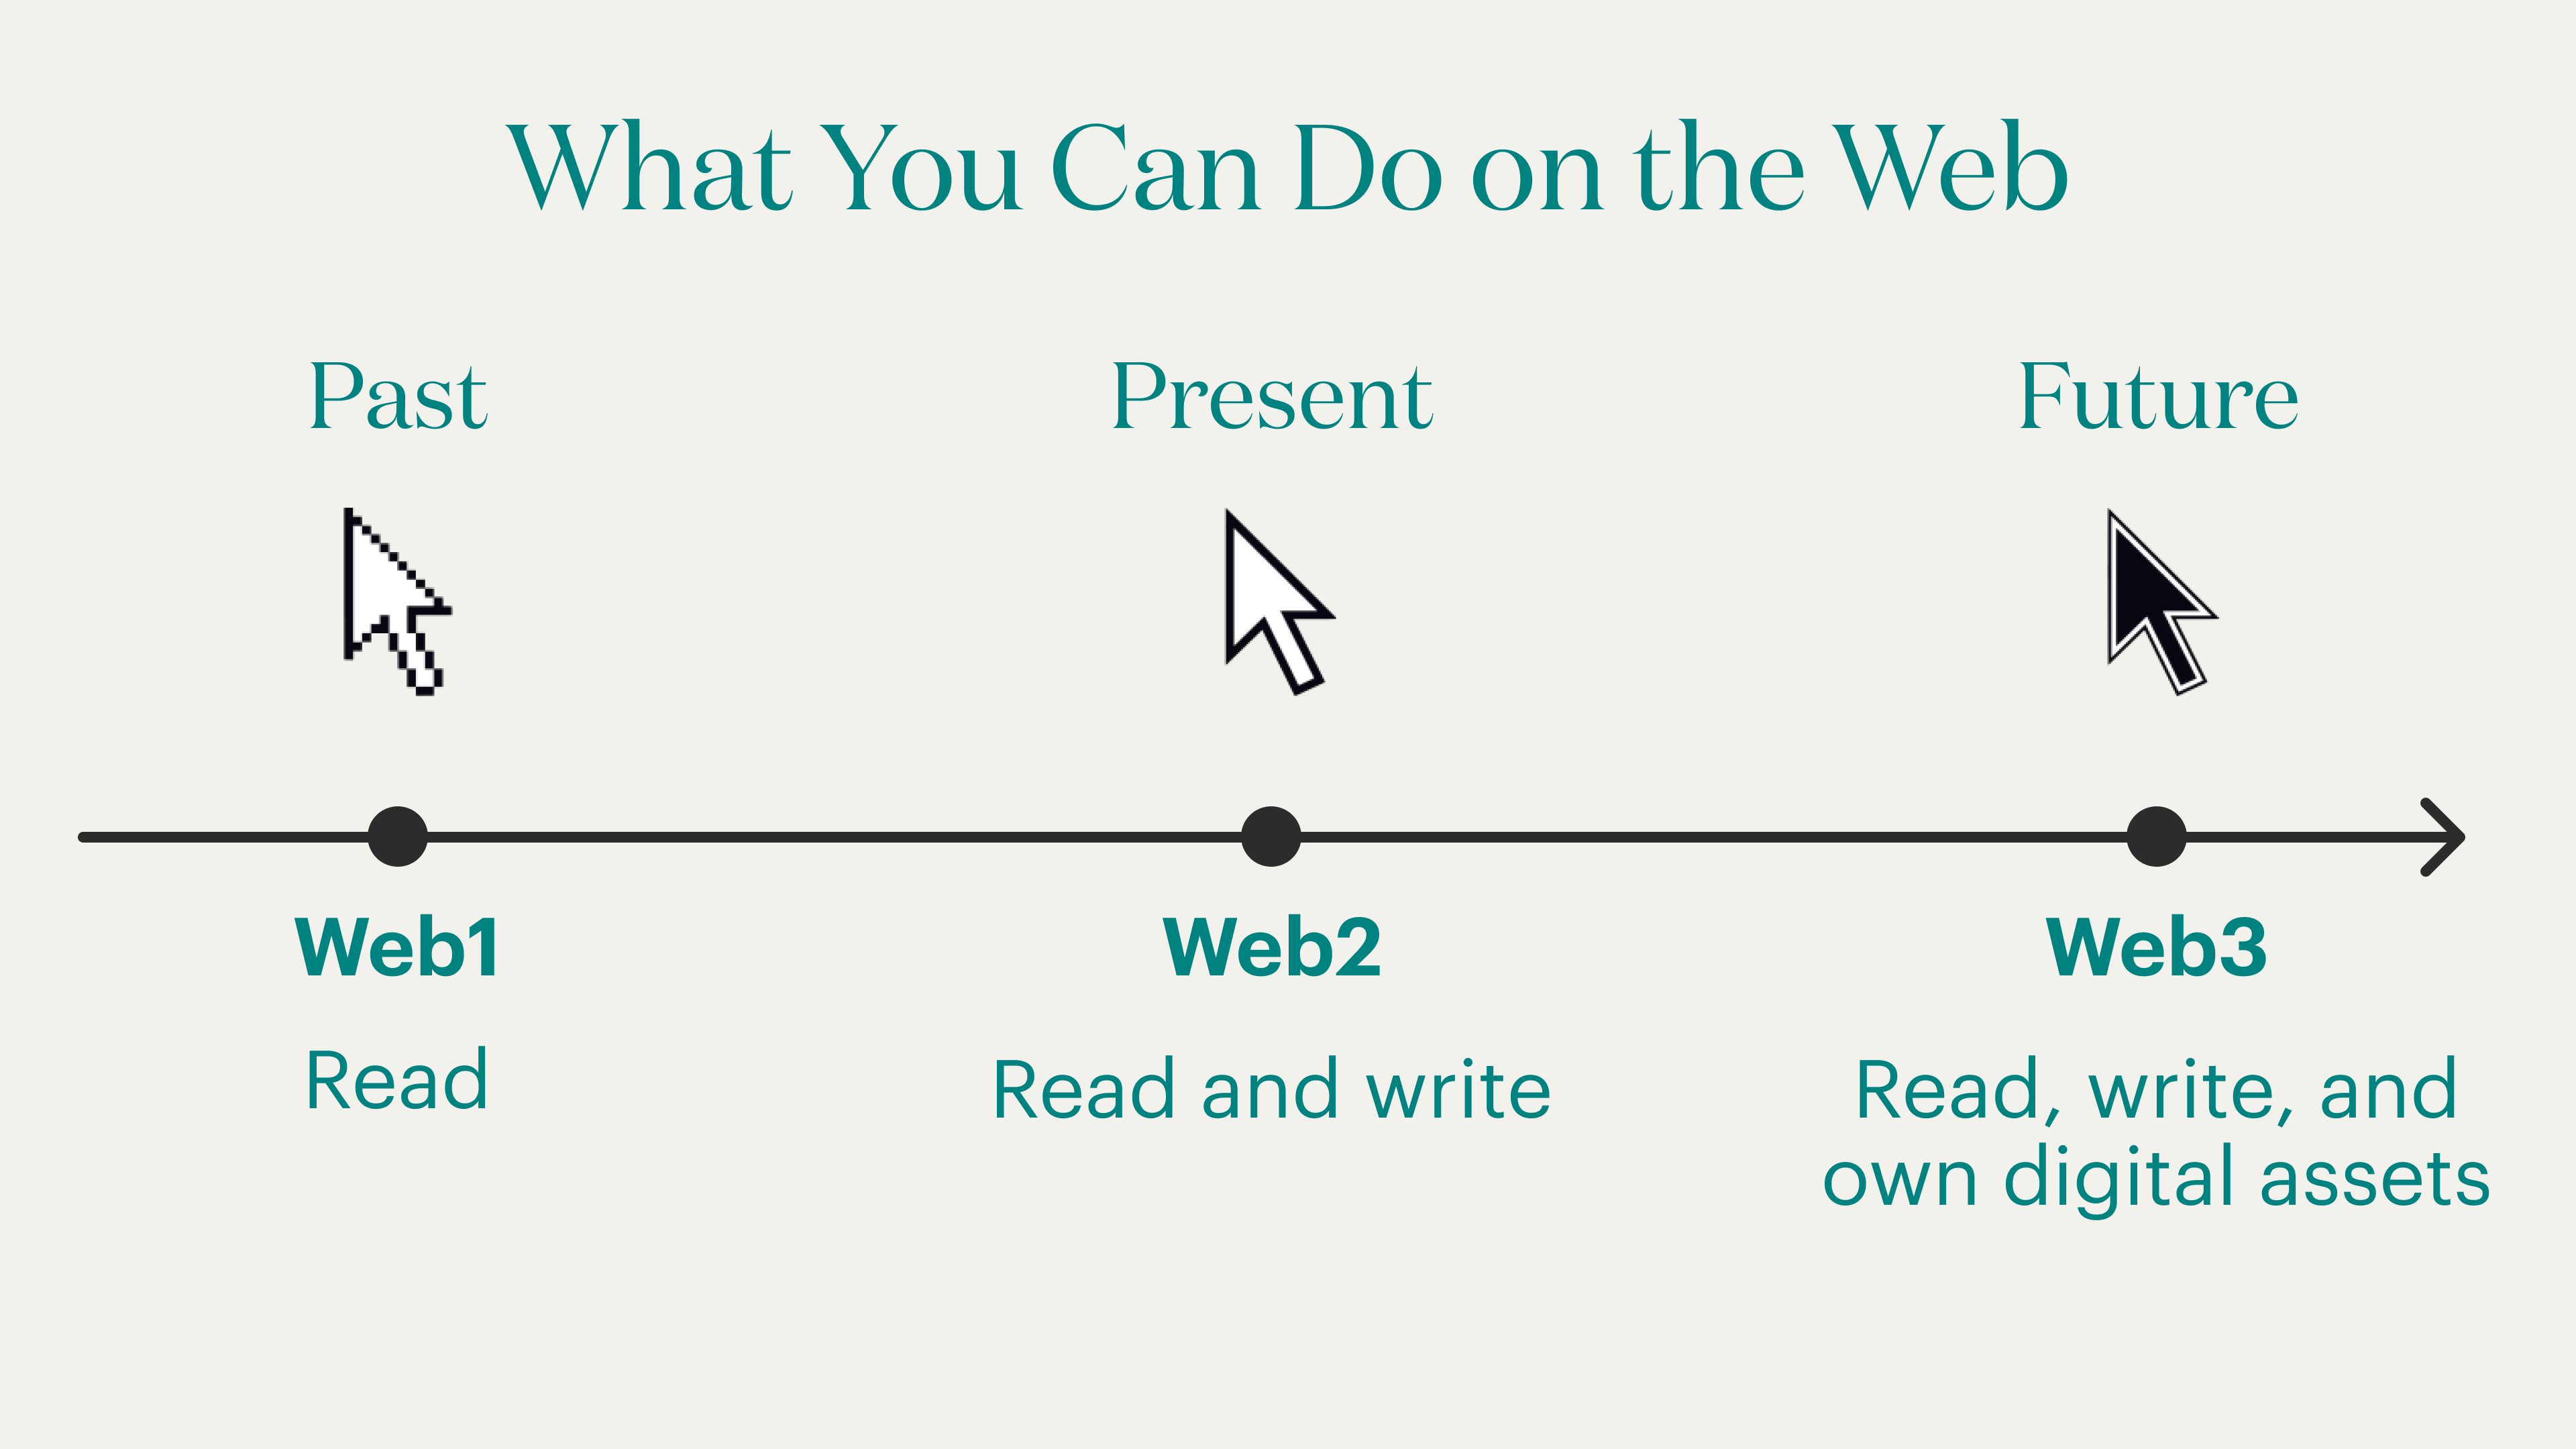 What you can do on the web: Web1, read; Web2, read & write; Web3: read, write, and own.